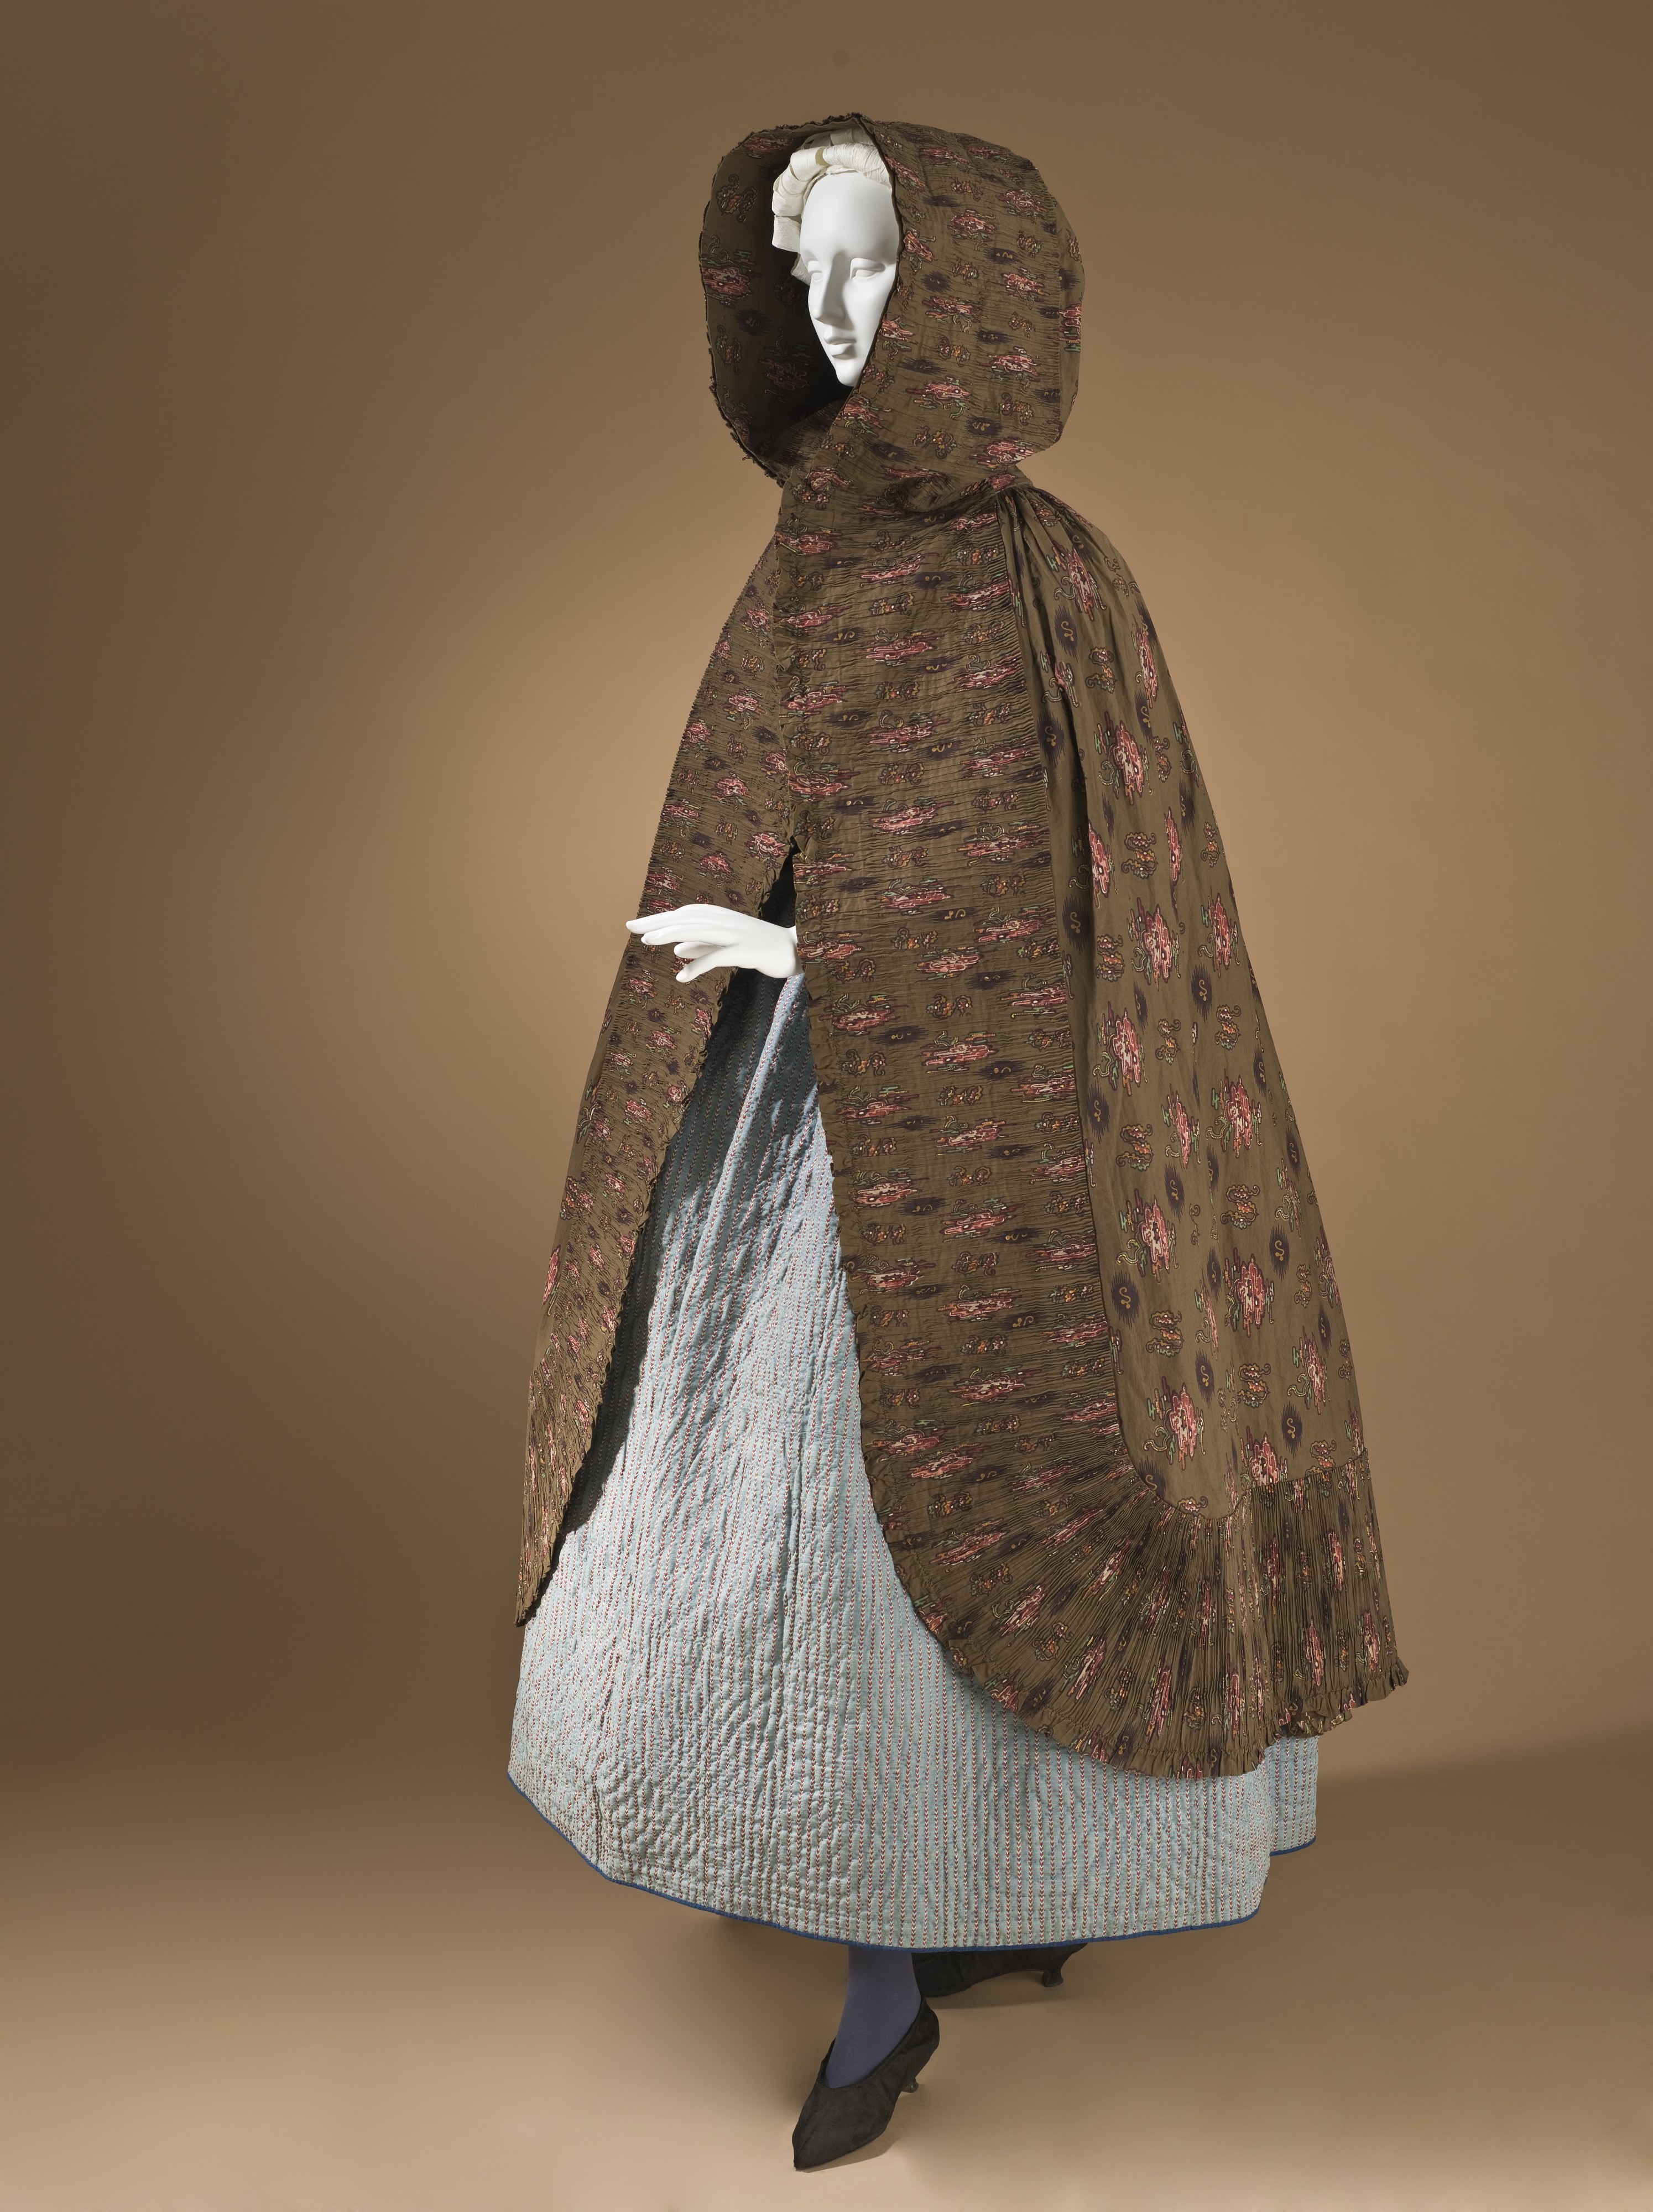 Woman’s hooded cape Provence 1785-1820